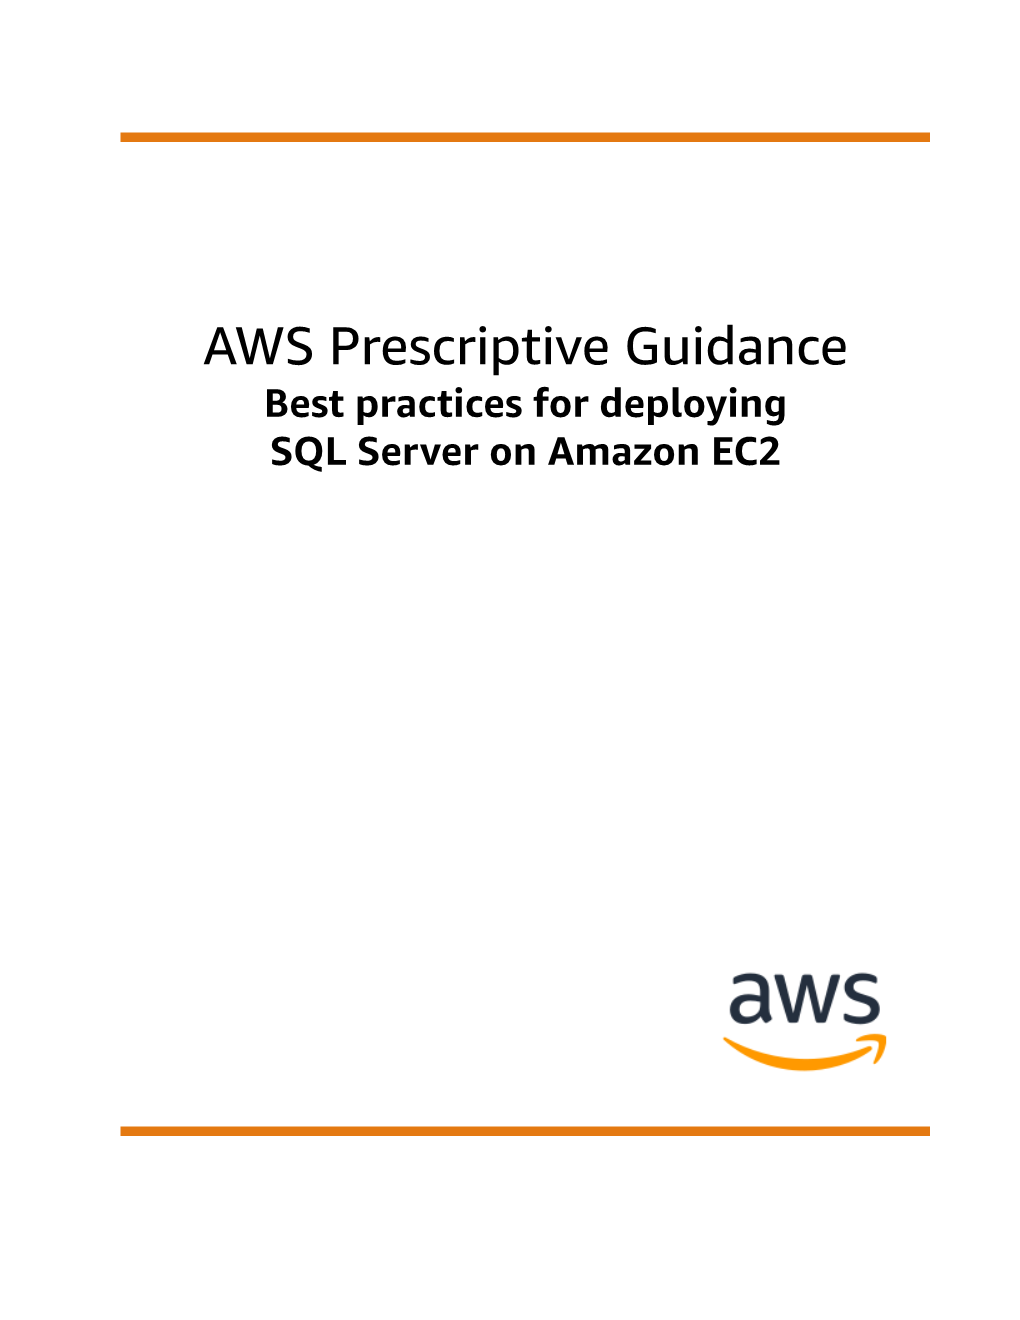 Best Practices for Deploying SQL Server on Amazon EC2 AWS Prescriptive Guidance Best Practices for Deploying SQL Server on Amazon EC2